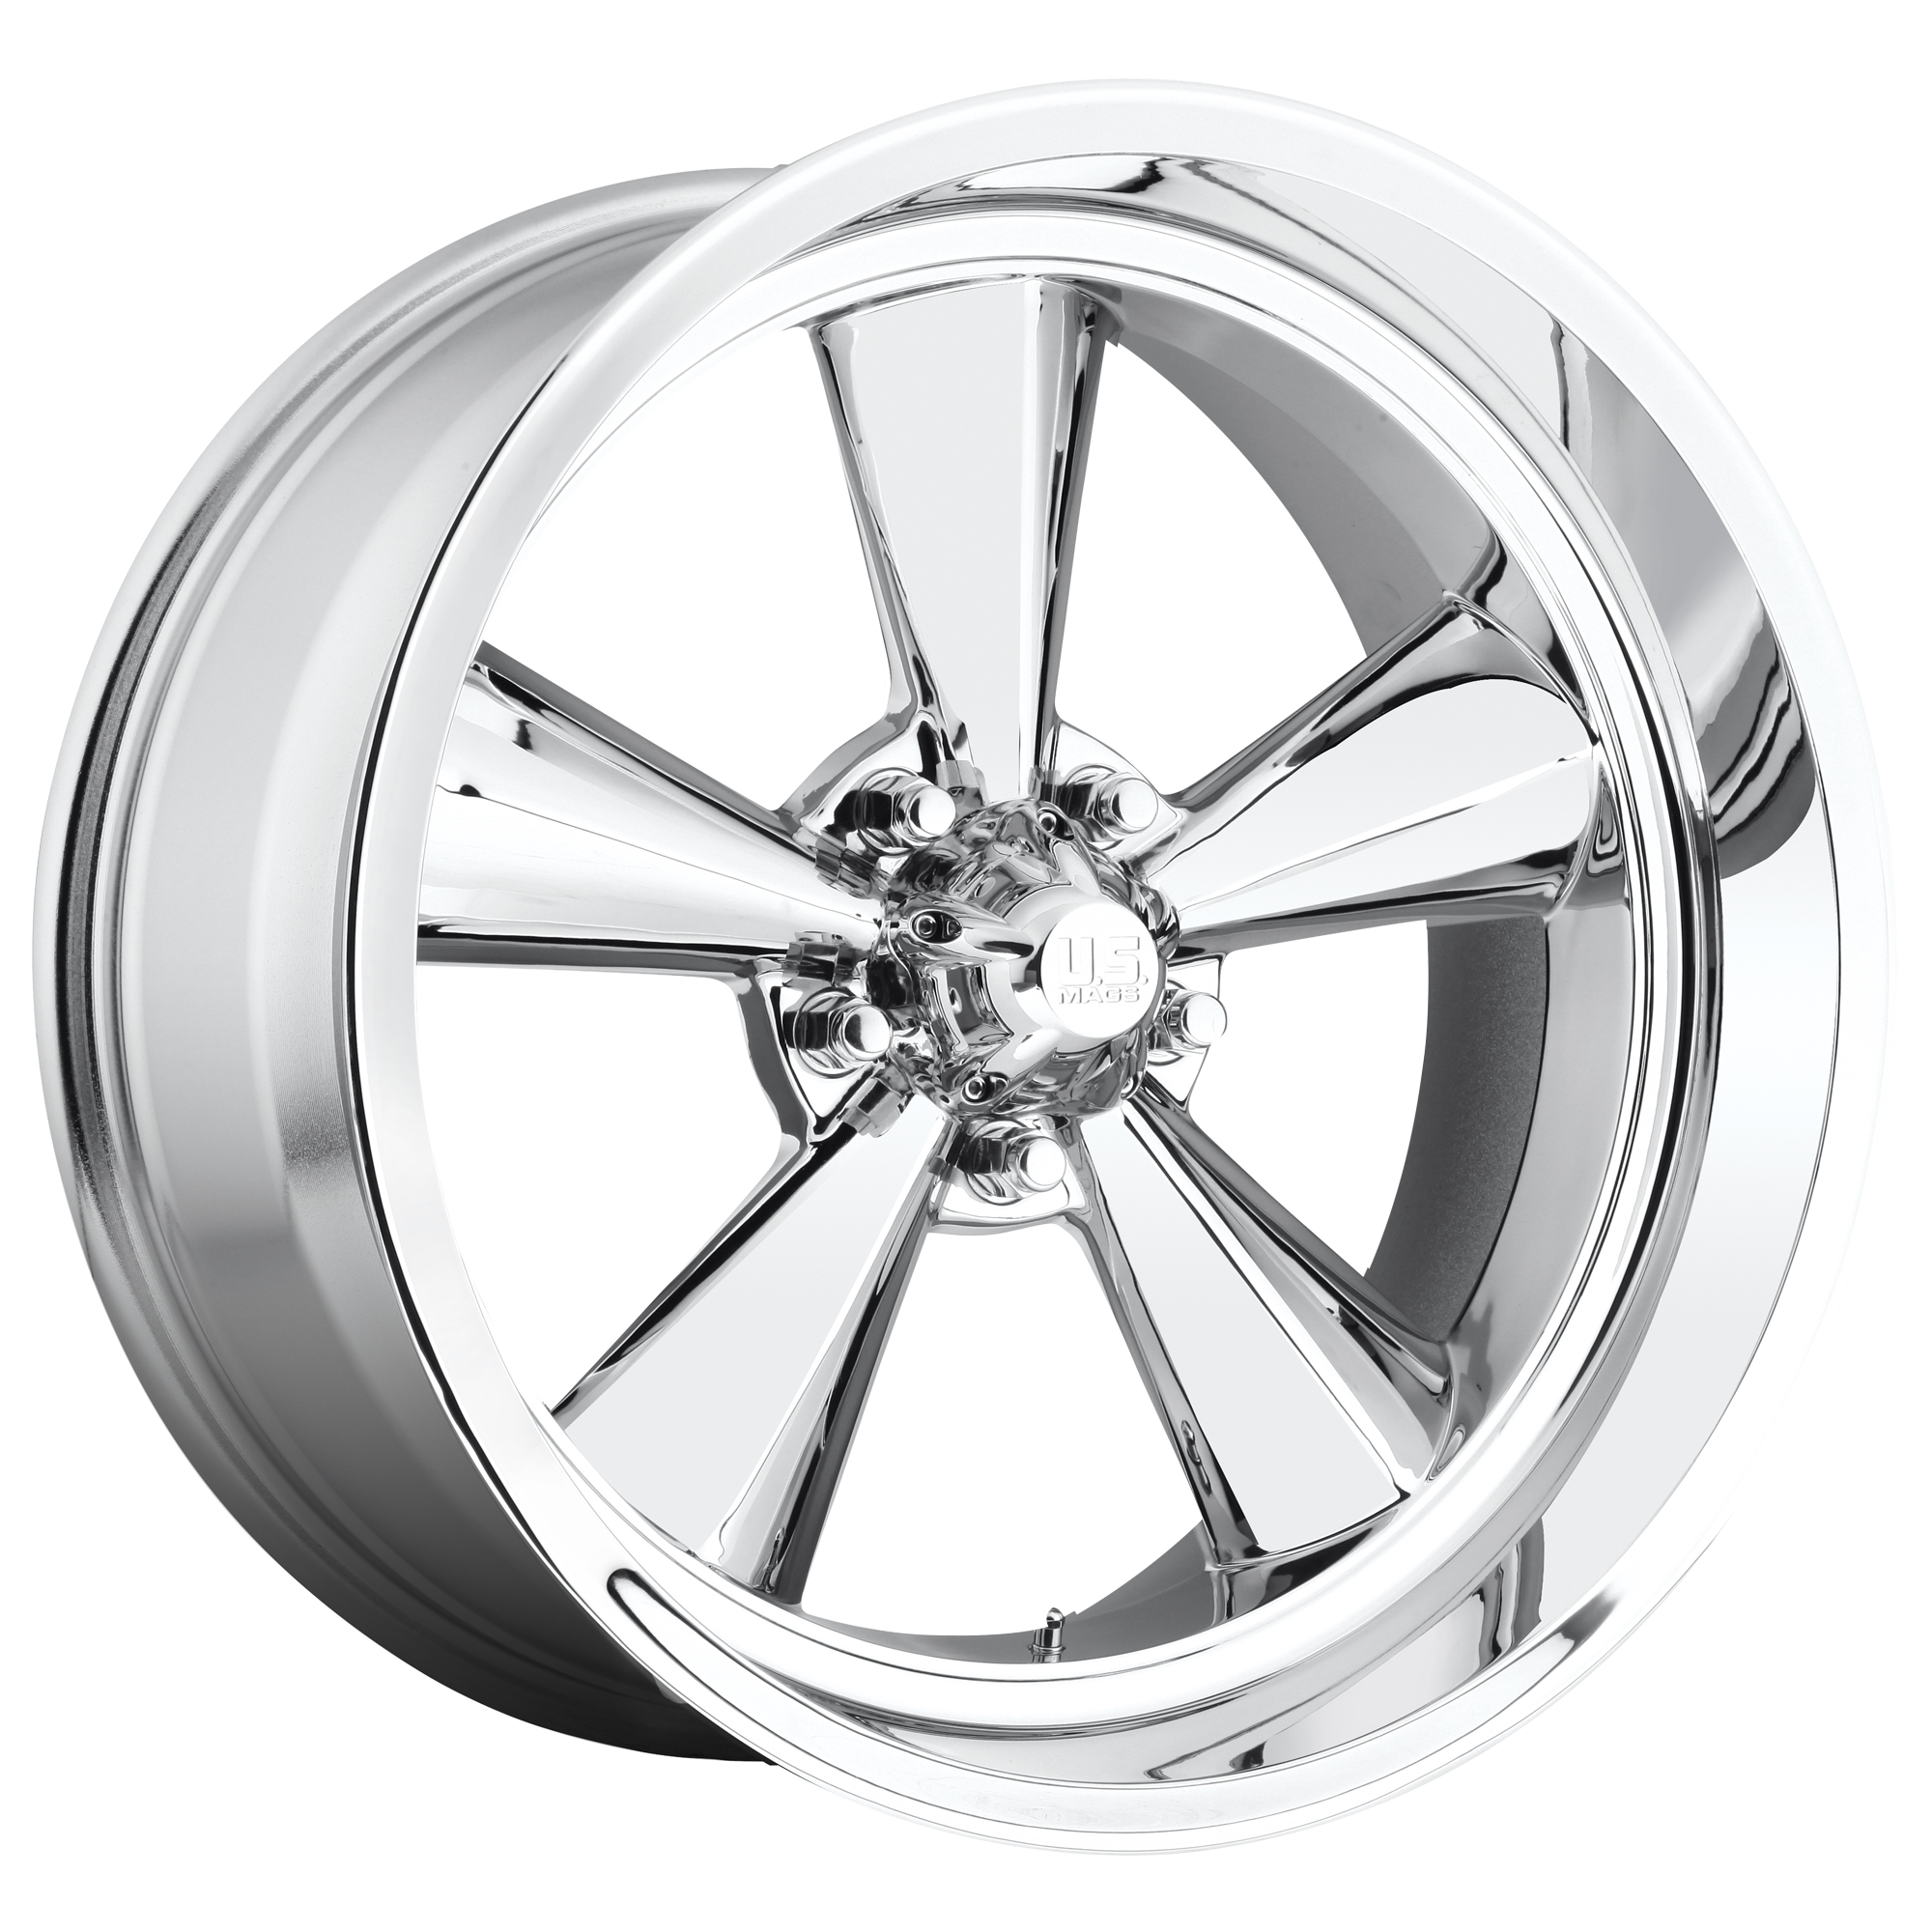 STANDARD 15x8 5x120.65 CHROME PLATED (0 mm) - Tires and Engine Performance